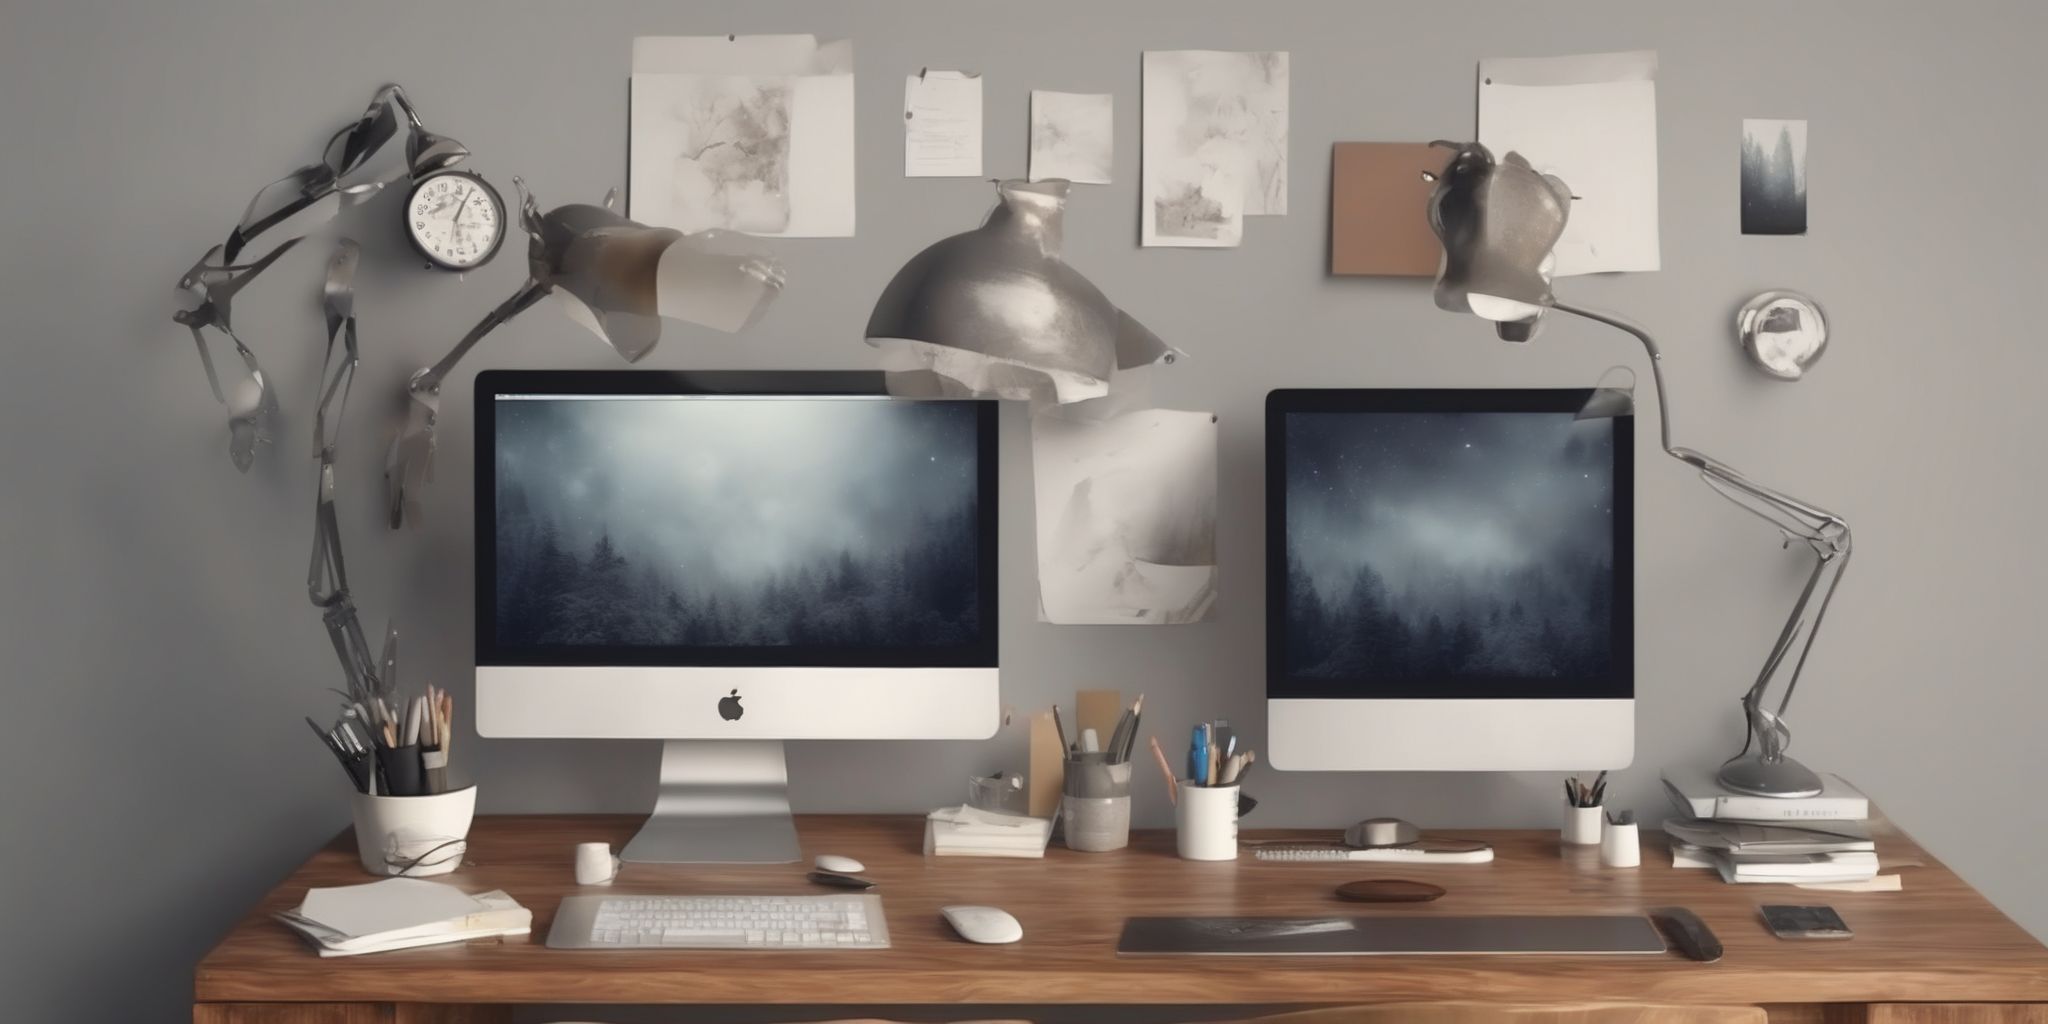 Desk  in realistic, photographic style